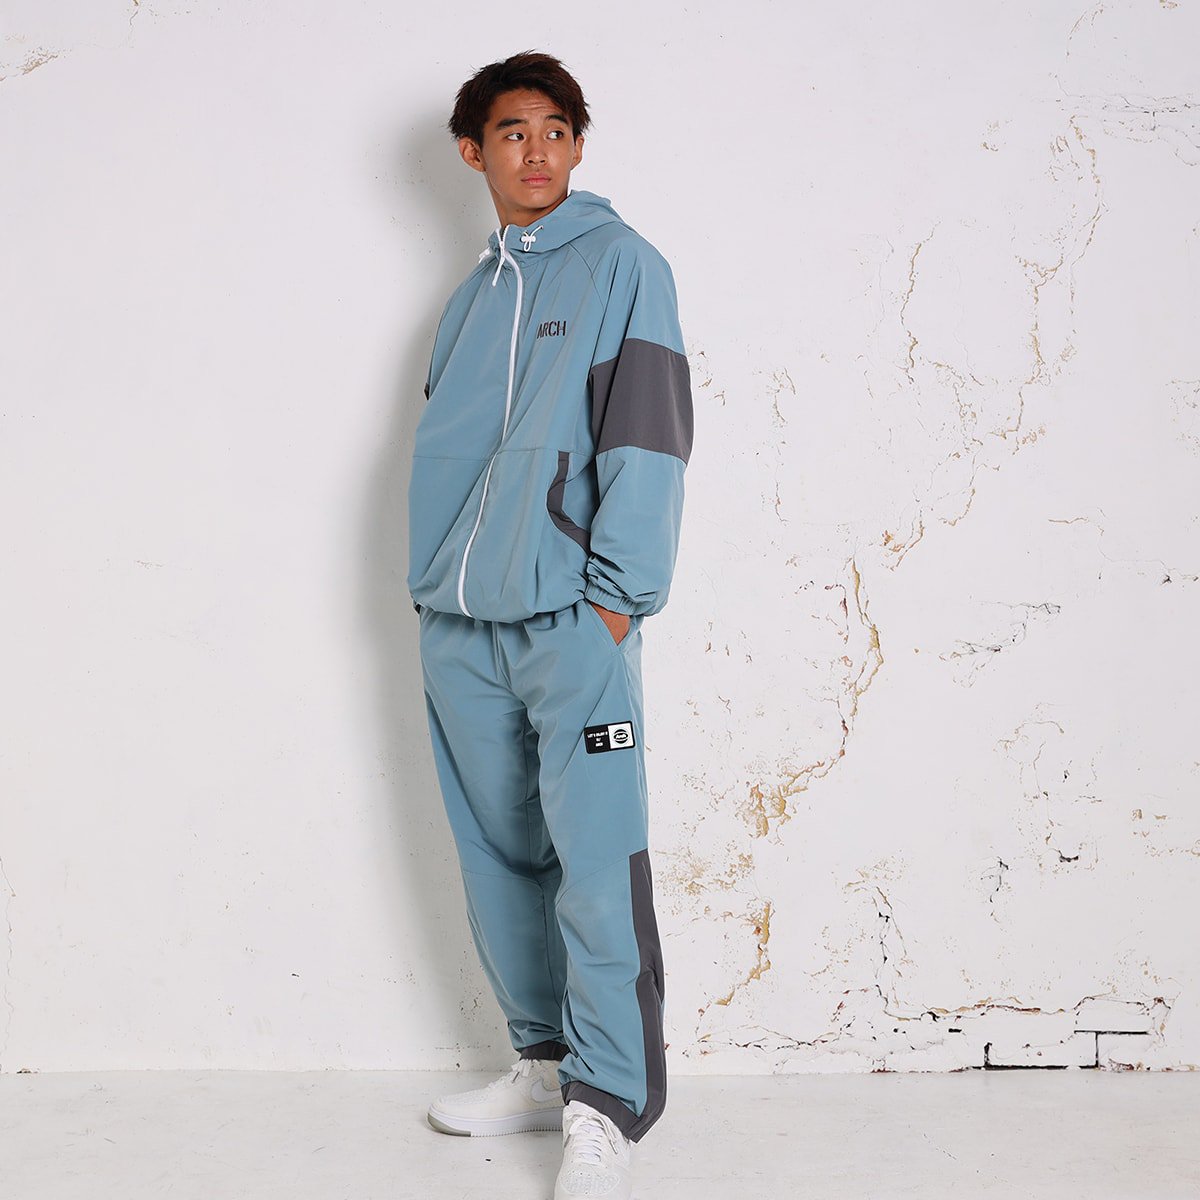 classic track jacket【stone blue】 - Arch ☆ アーチ